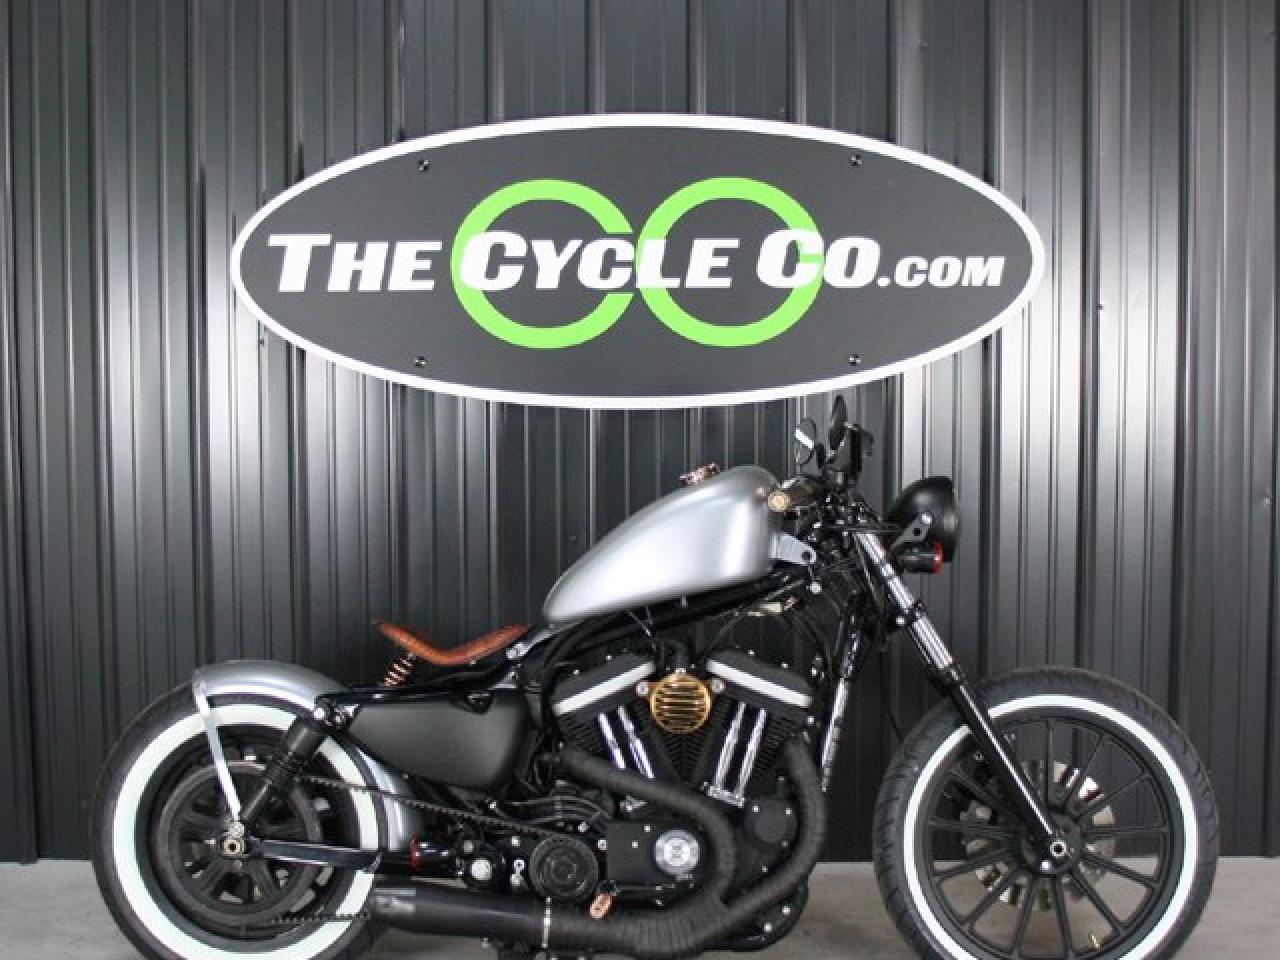 Used 2009 HARLEY DAVIDSON SPORTSTER IRON For Sale in Columbus, OH